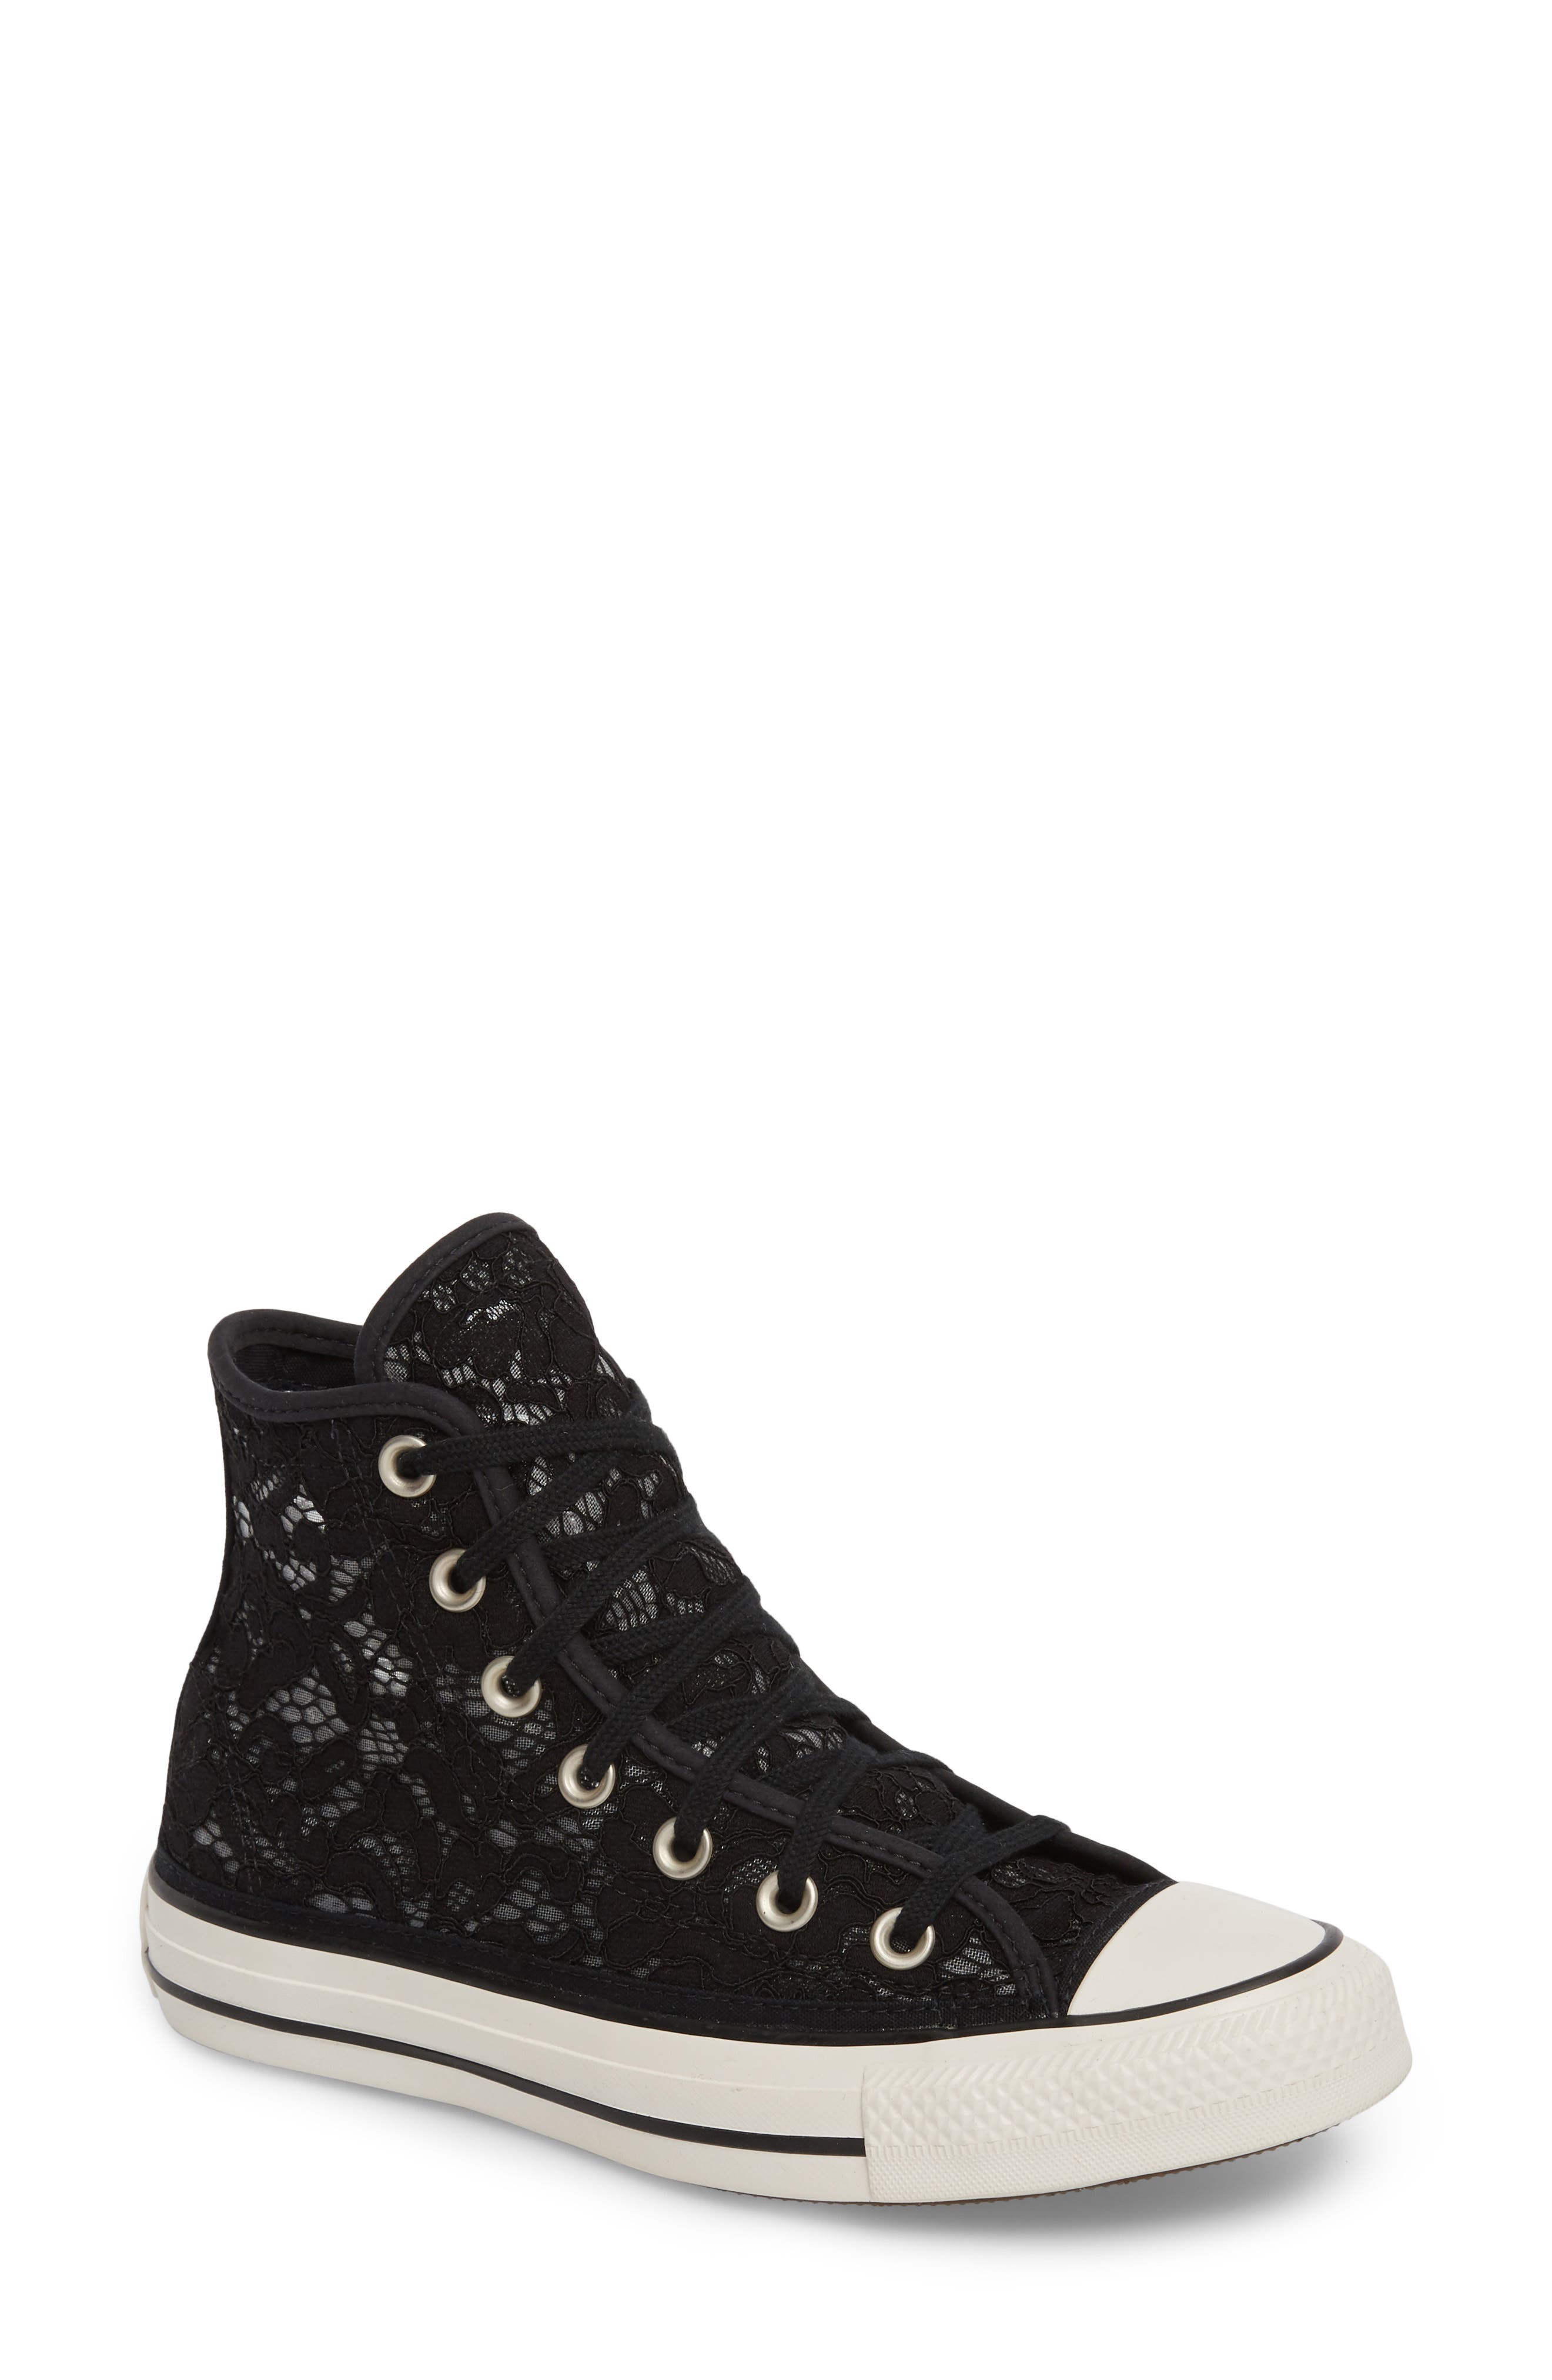 lace length for converse high tops